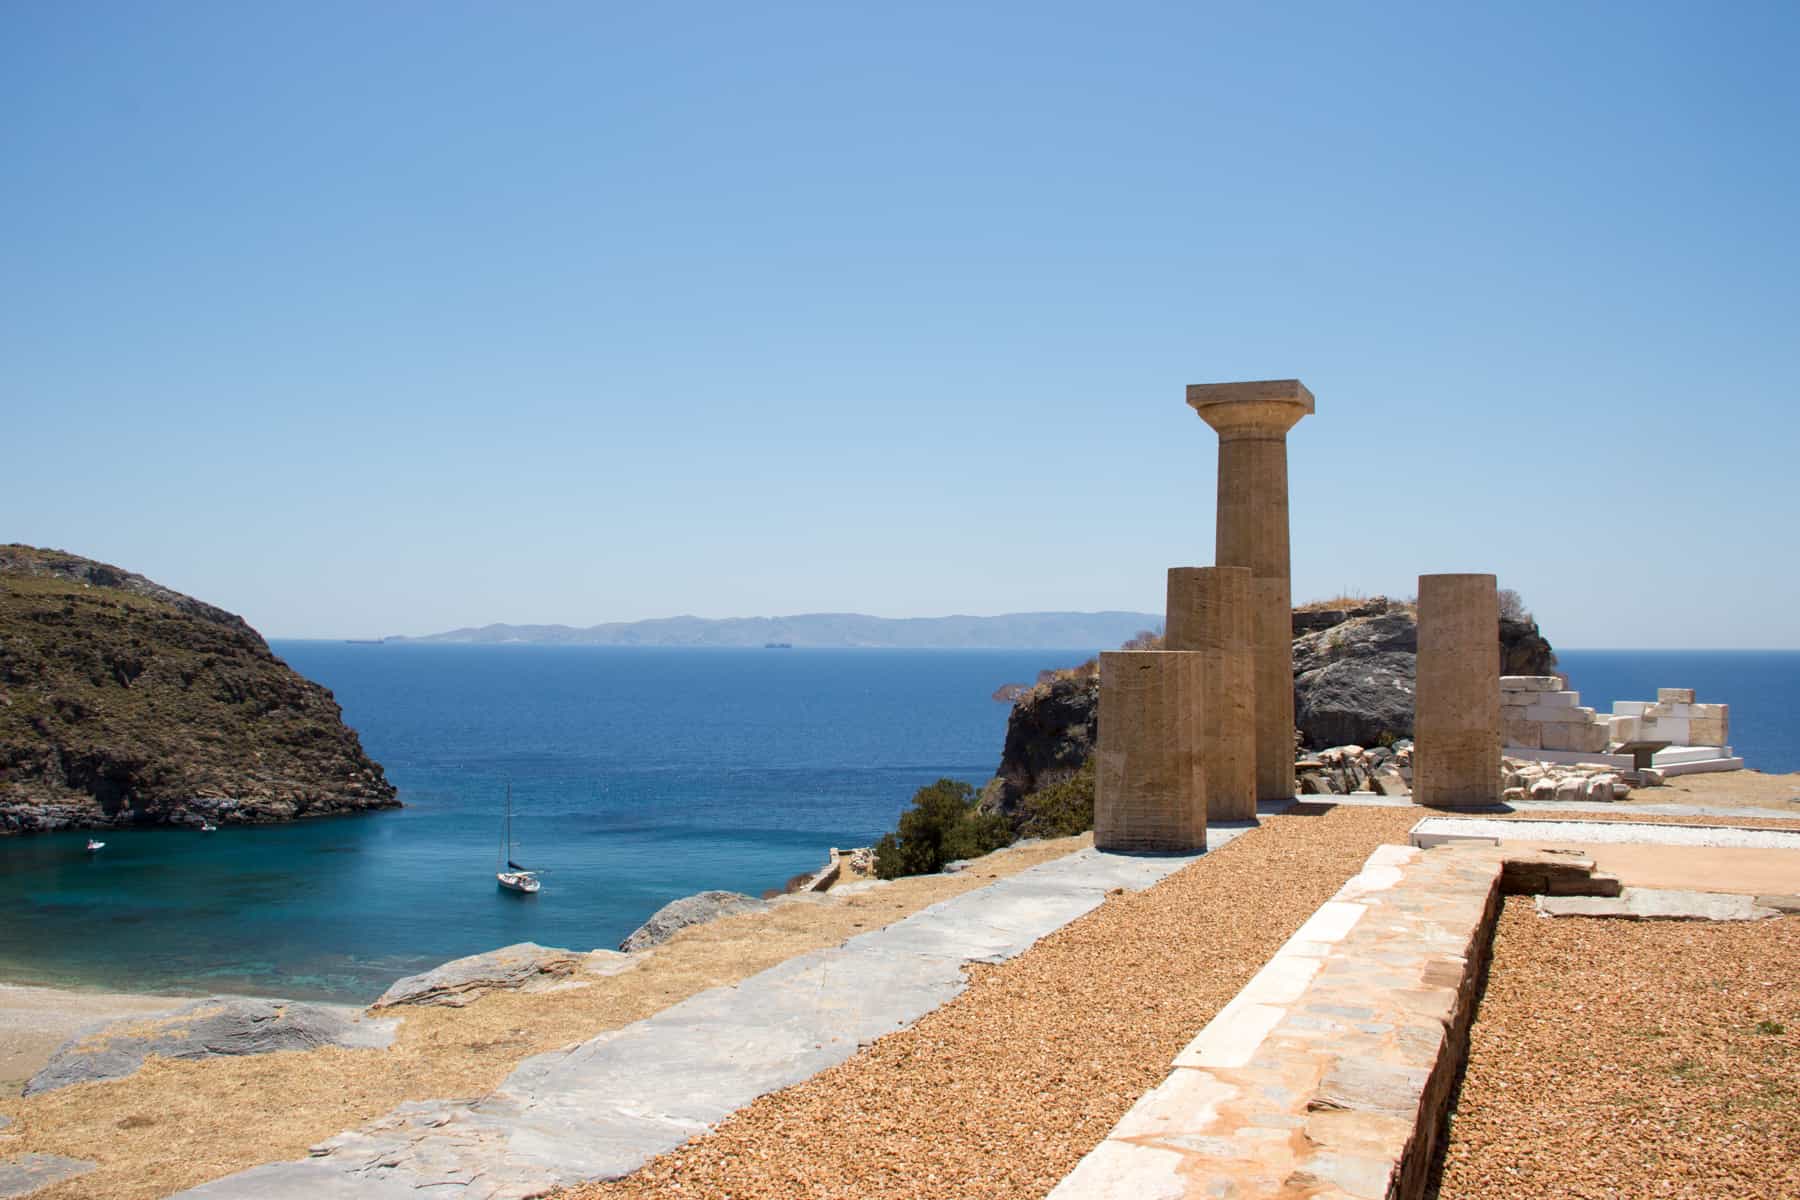 The four columns of the Temple of Athena sit on a hillside of the ancient city of Karthea in Kea island, overlooking the shimmering blue ocean water.